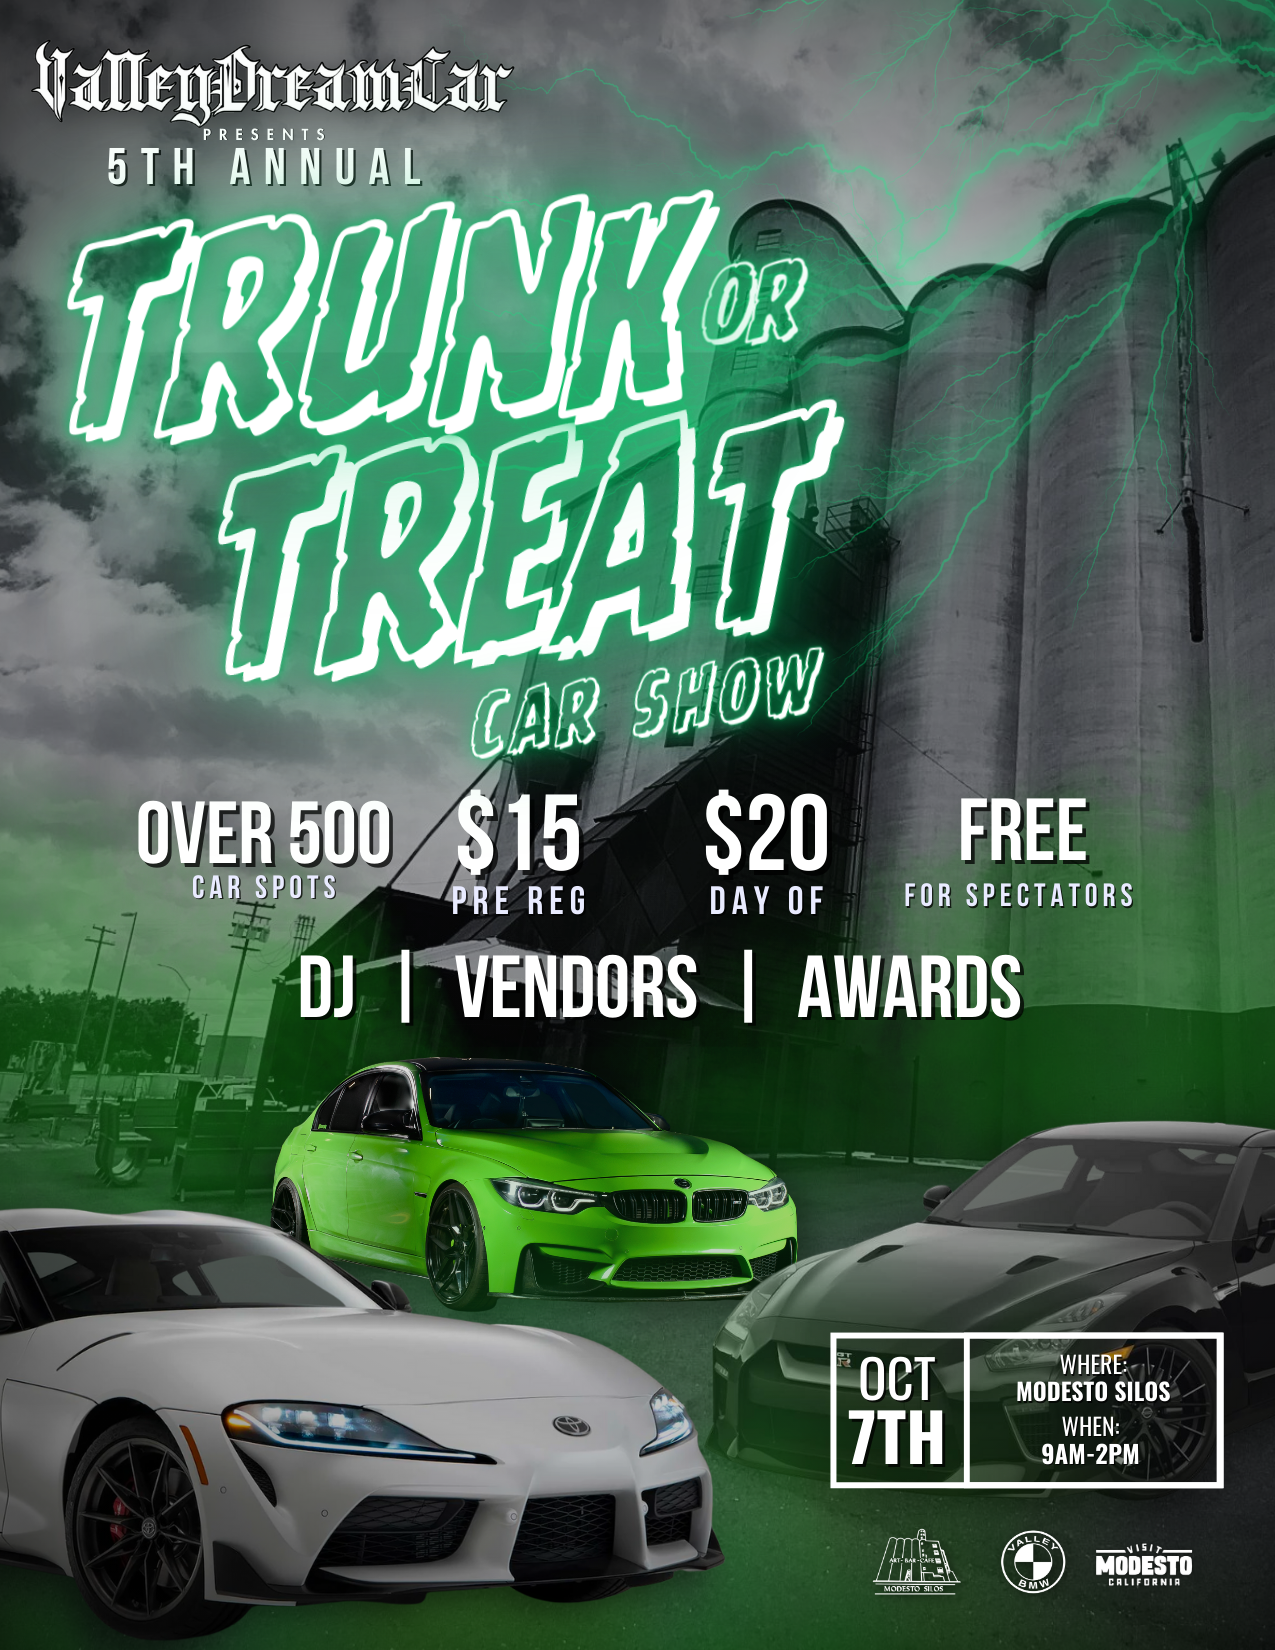 ValleyDreamCar's 5th Annual Trunk or Treat